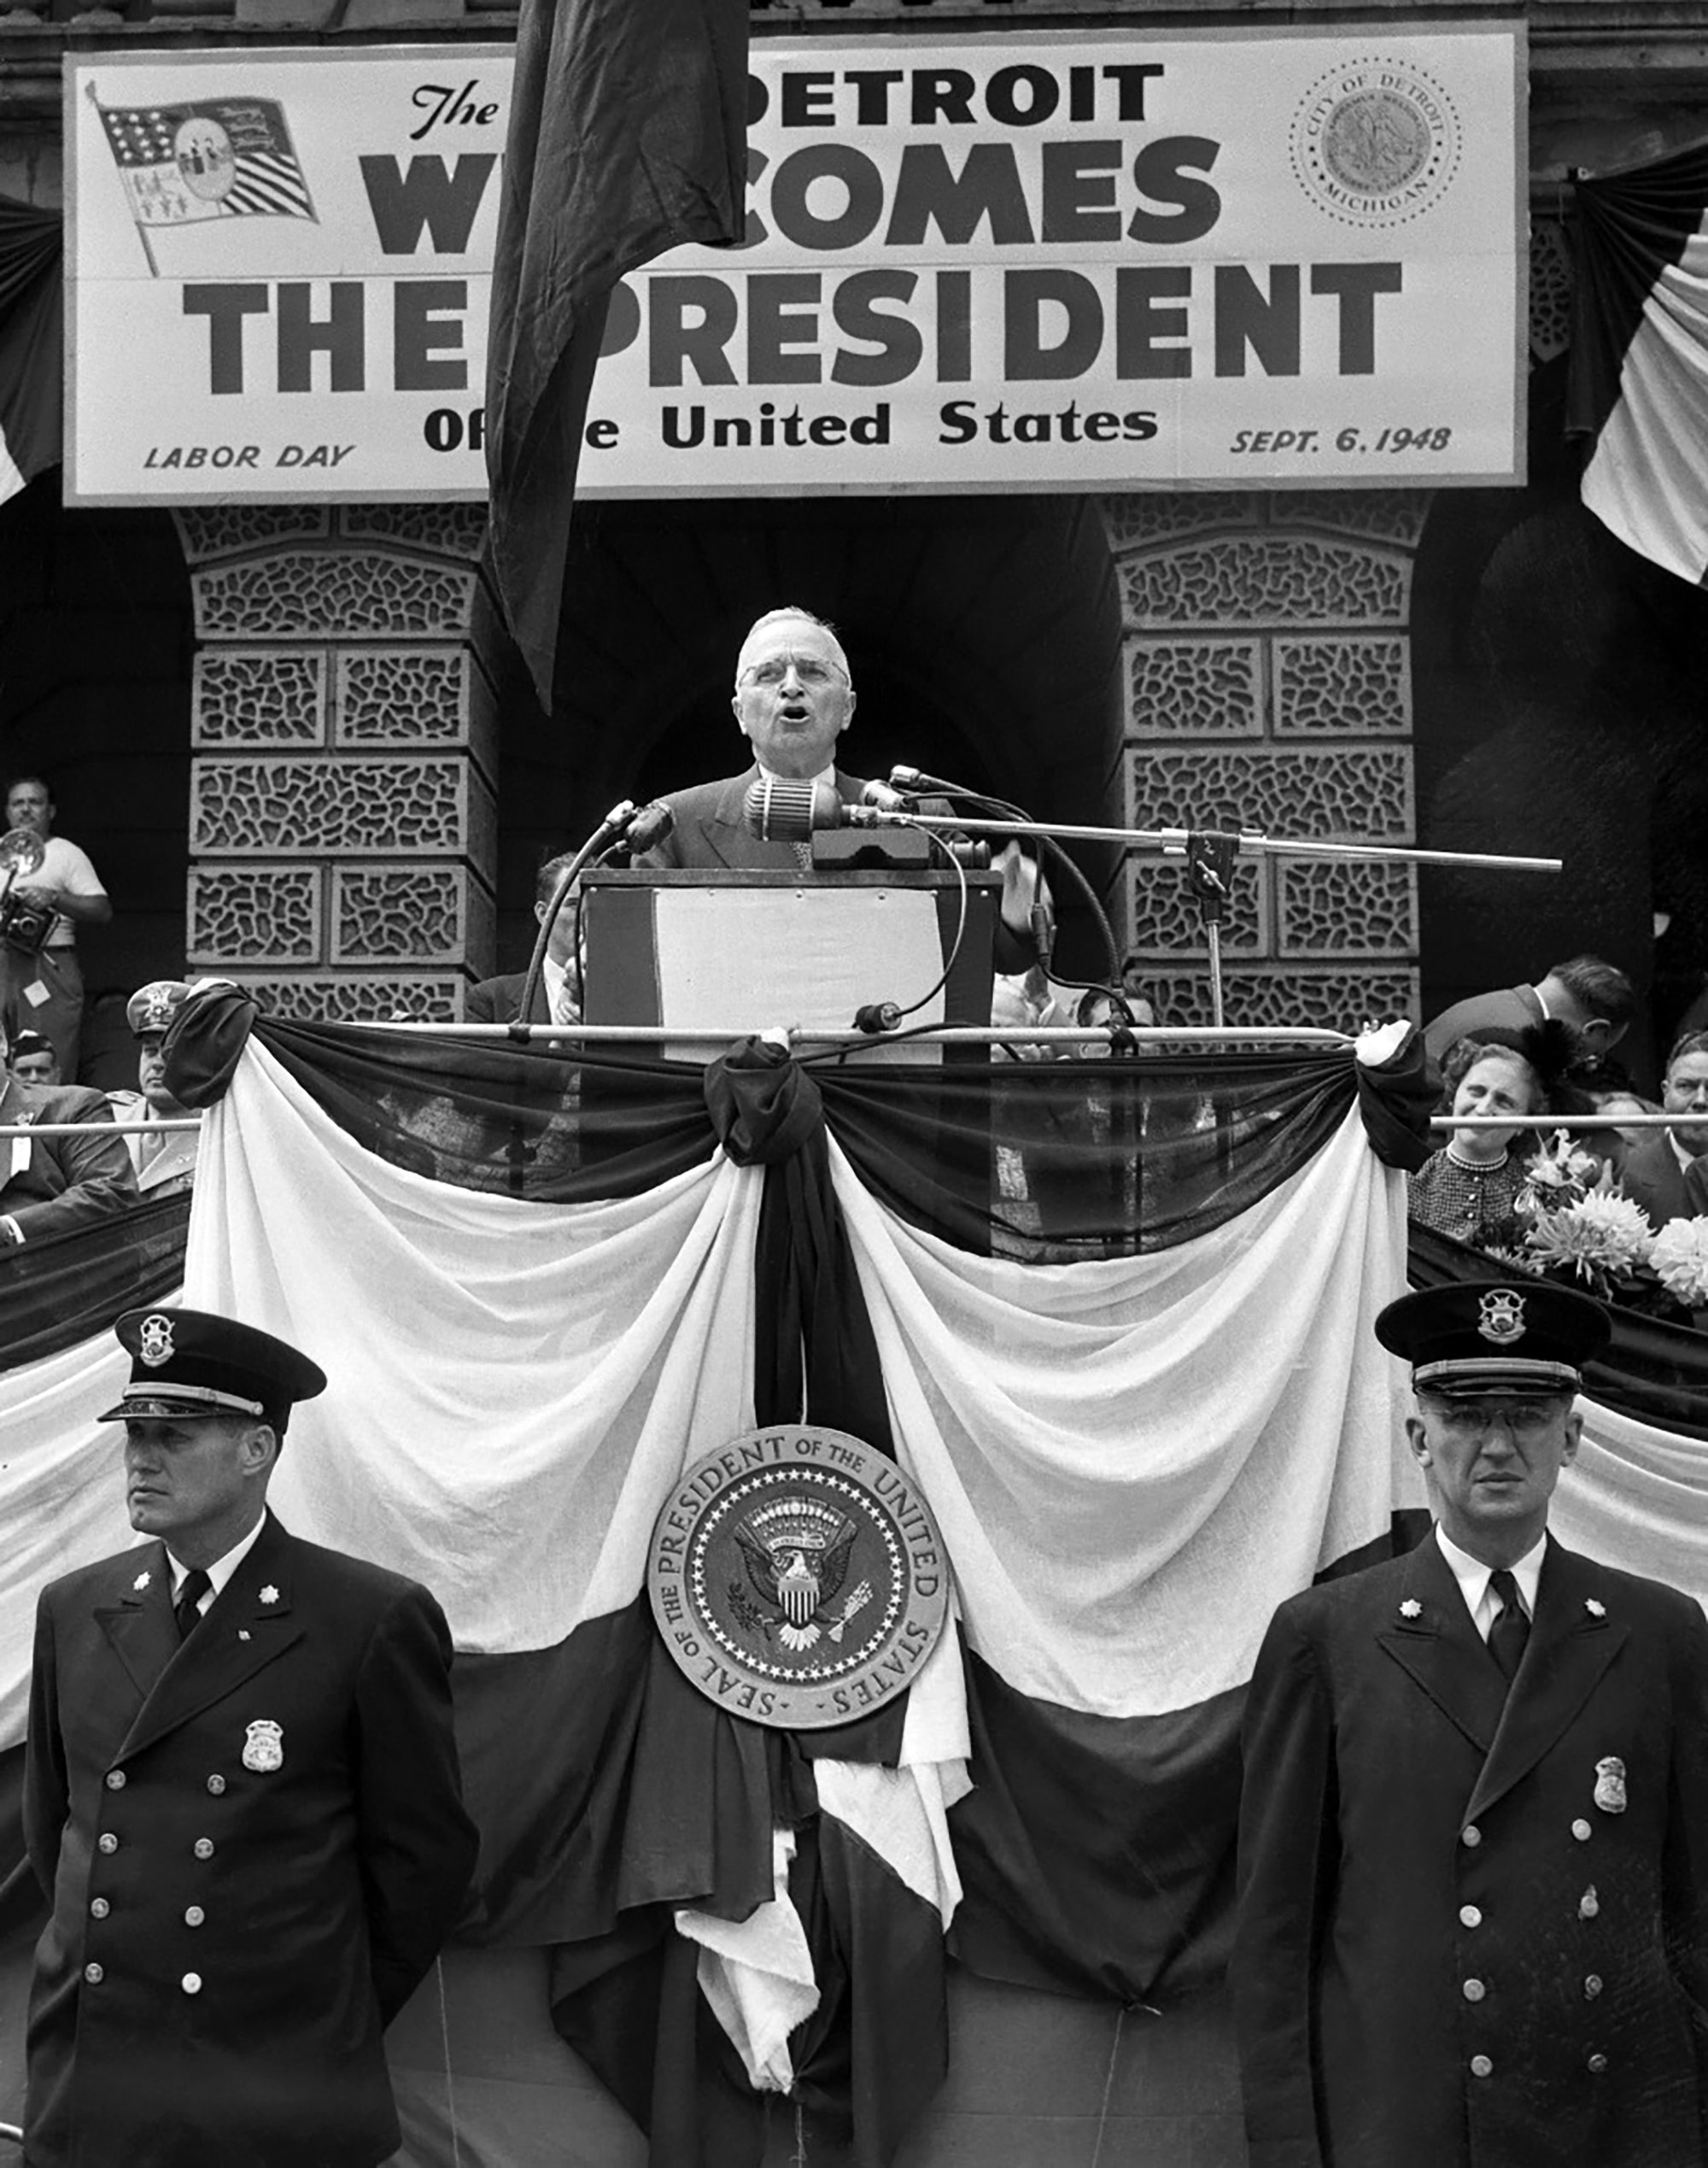 President Harry S. Truman speaking before 125,000 people in Detroit on Labor Day, 1948. Bettmann Archive — Getty Images